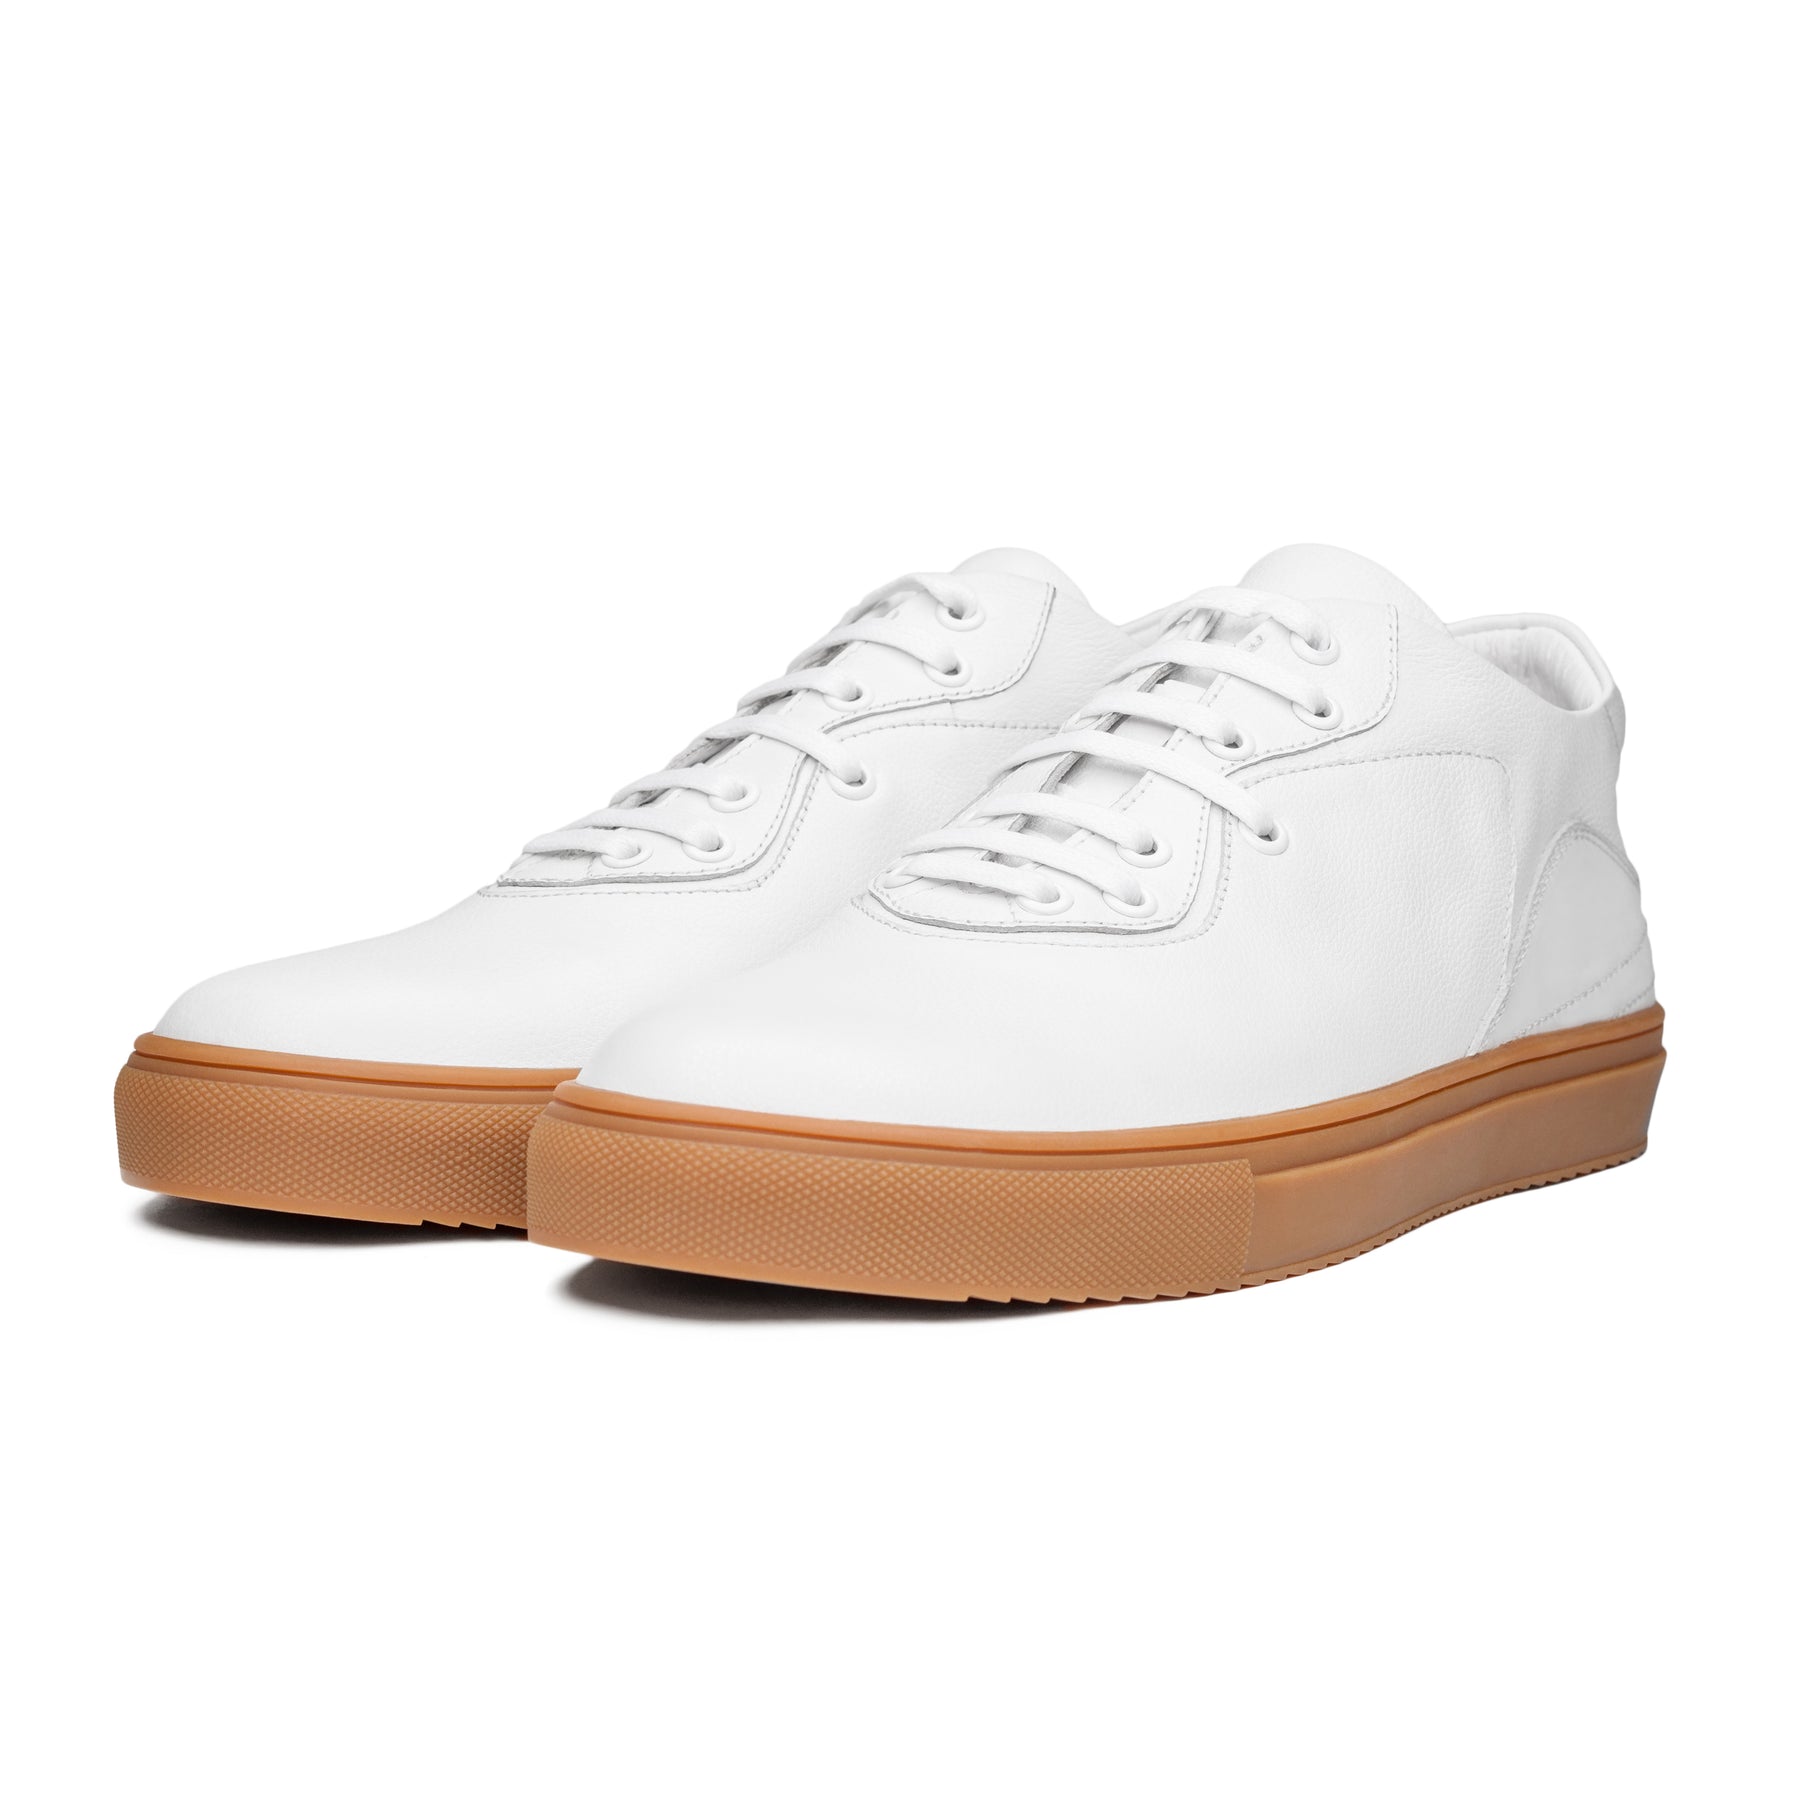 adidas Originals White Leather Gazelle Sneakers With Gum Sole | ASOS